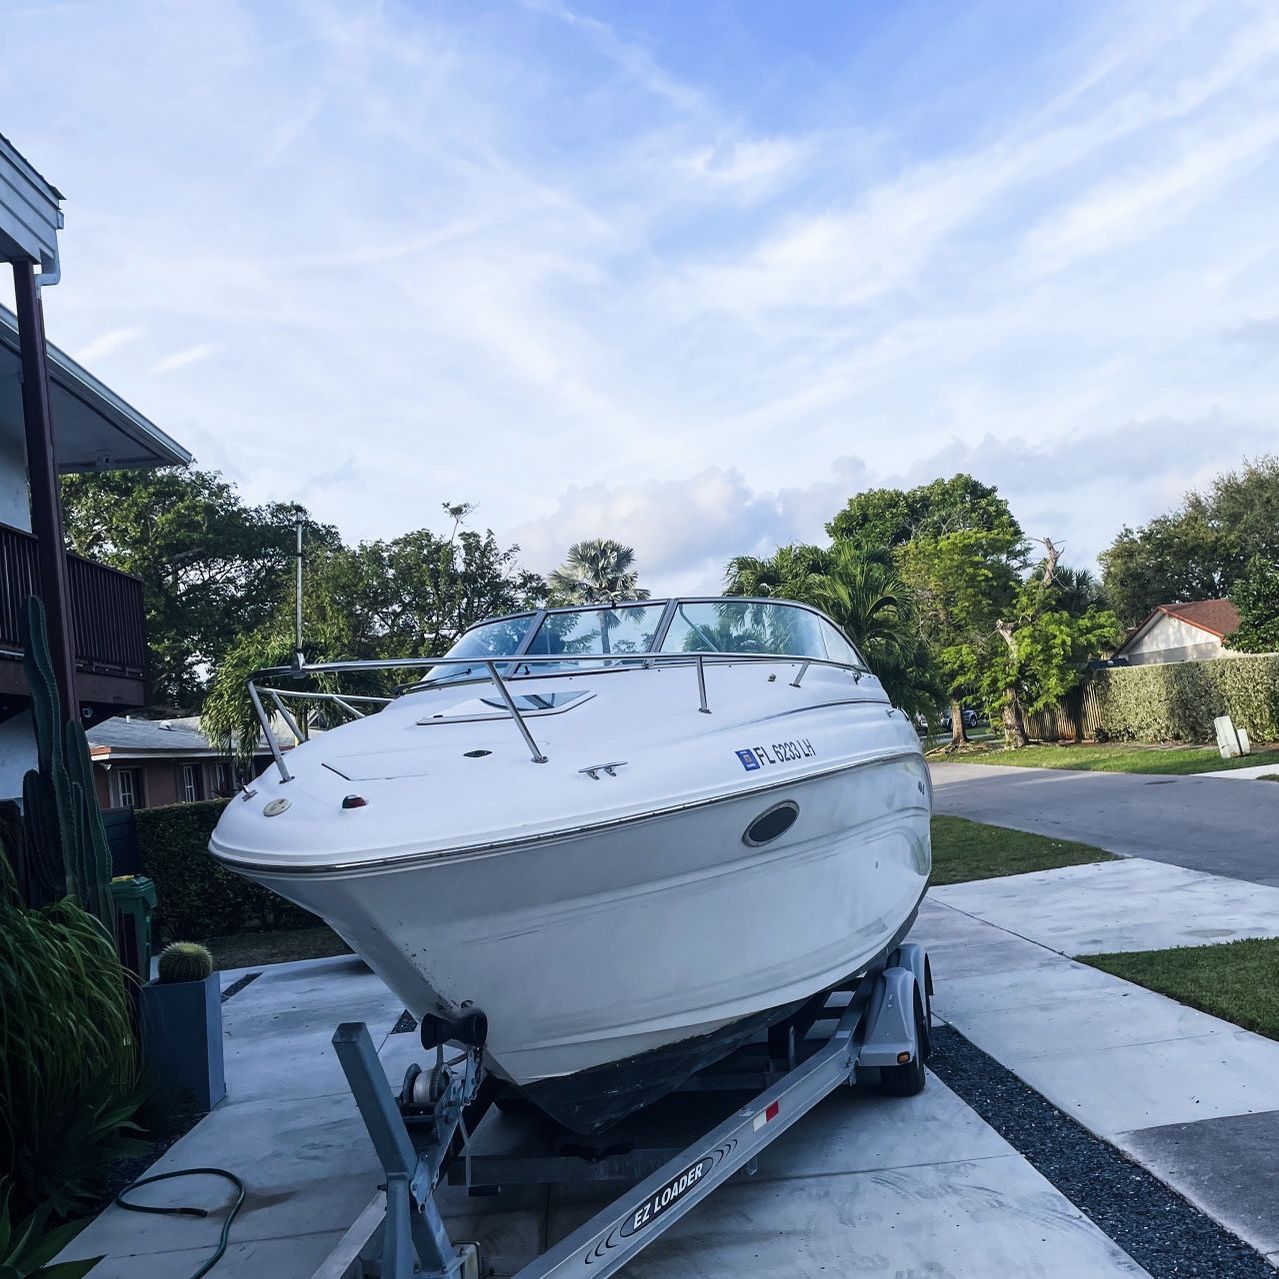 SeaRay Weekender 245 Boat with Trailer